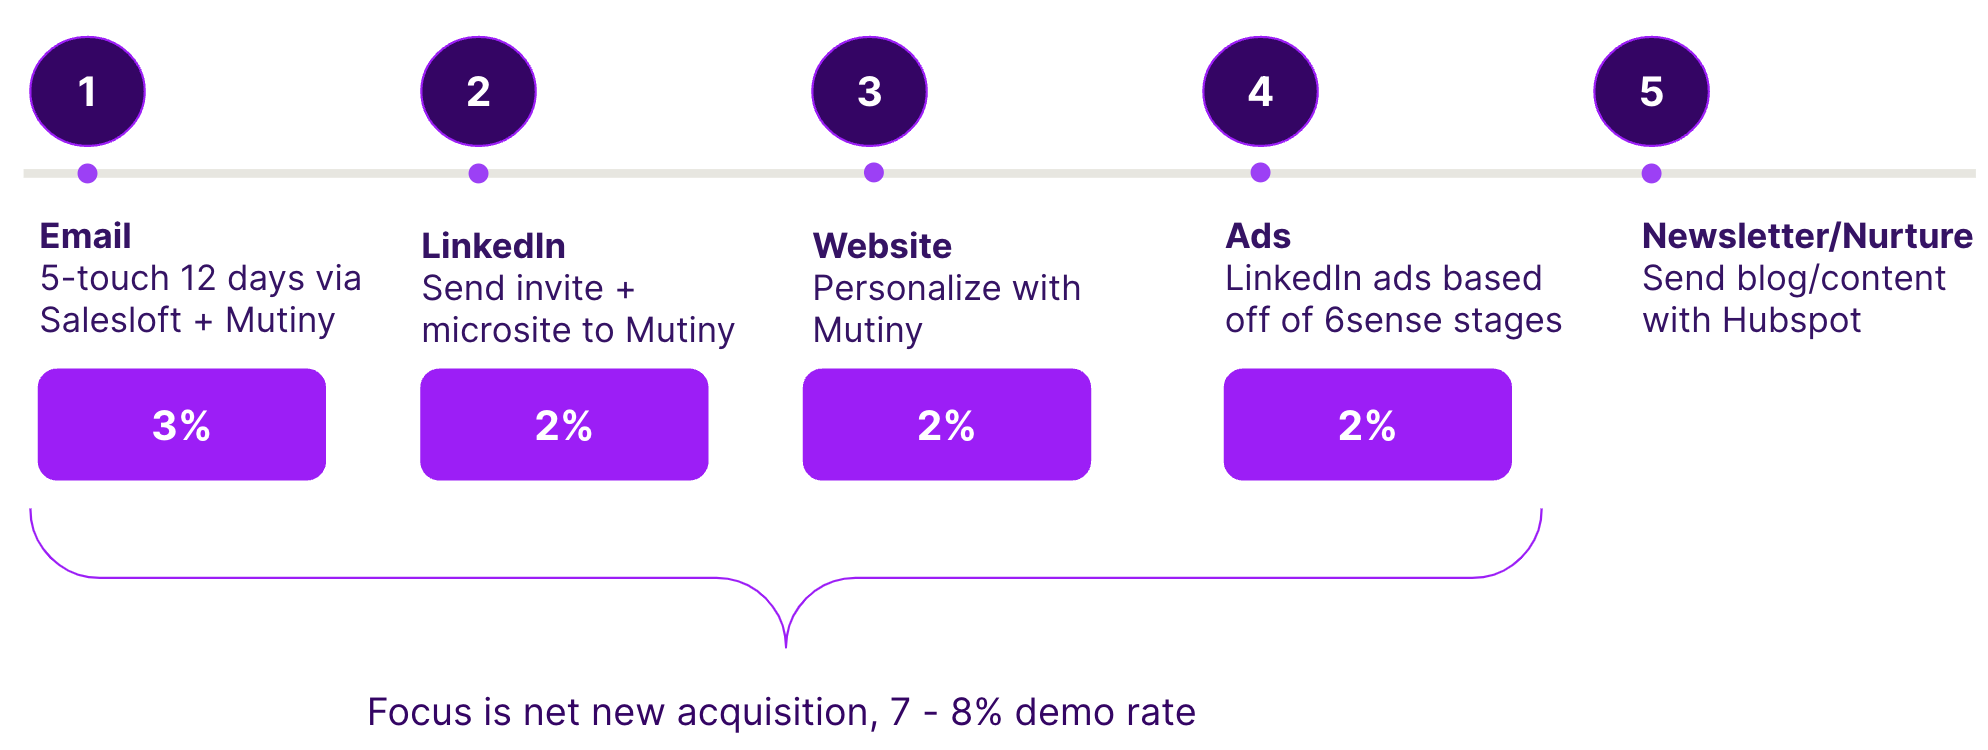 Mutiny’s conversion rates for each channel